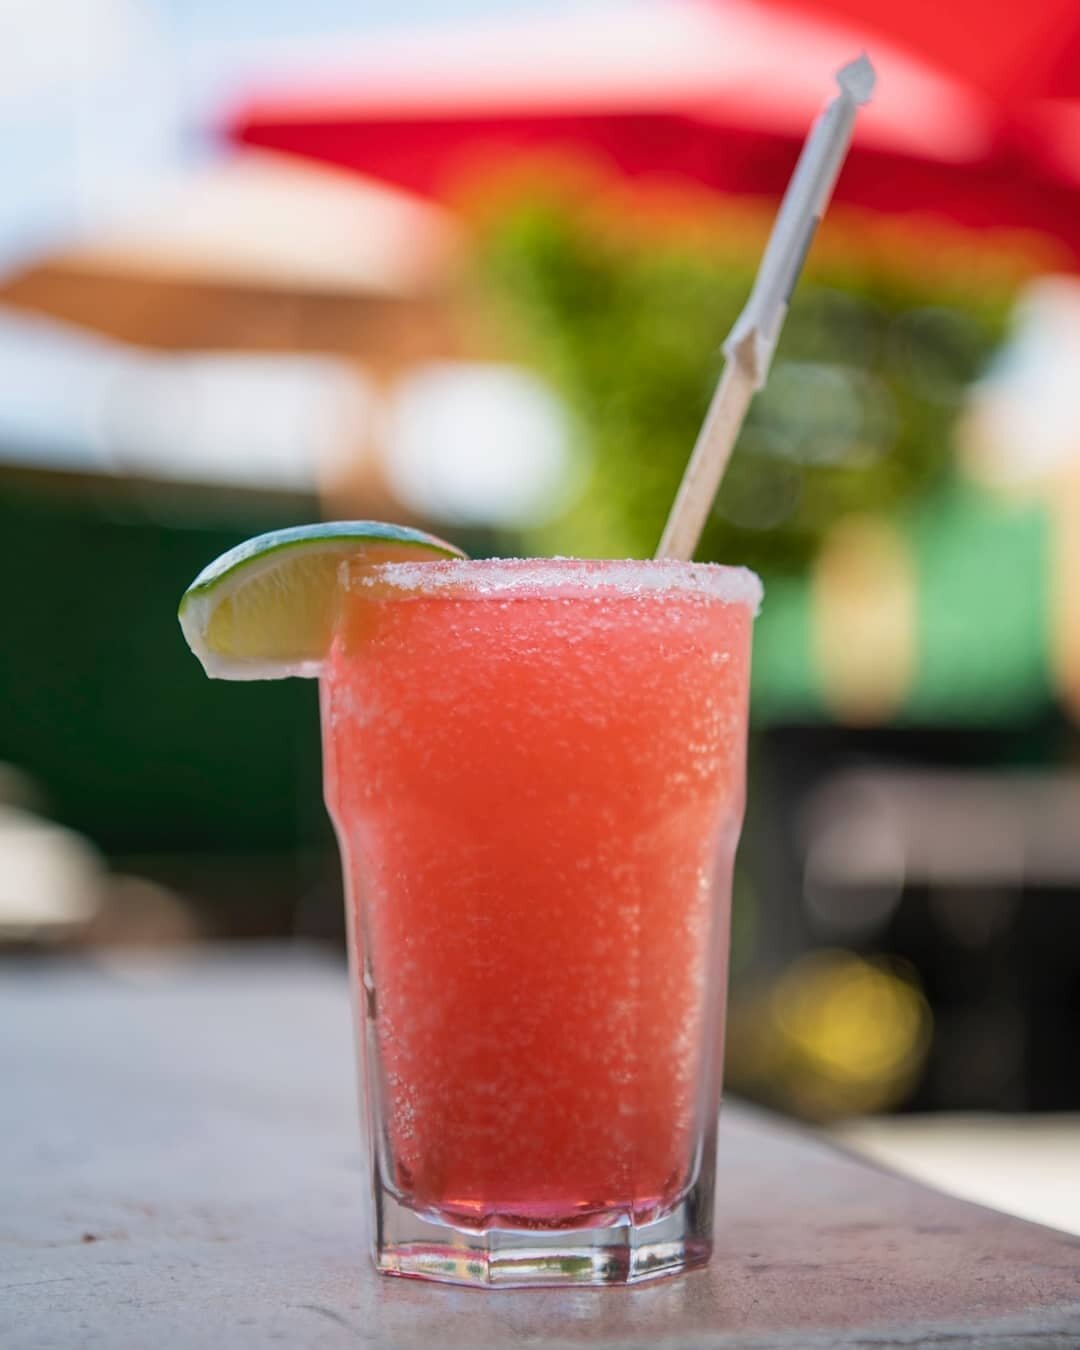 BEAT THE HEAT with our awesome selection of cocktails, including our NEW frozen cocktails at SOHA Bar &amp; Grill! Serving from 4-11pm. Join us at the bar, in the dining room or on the patio.
​.
​#sohabarandgrill #cocktails #patiostl